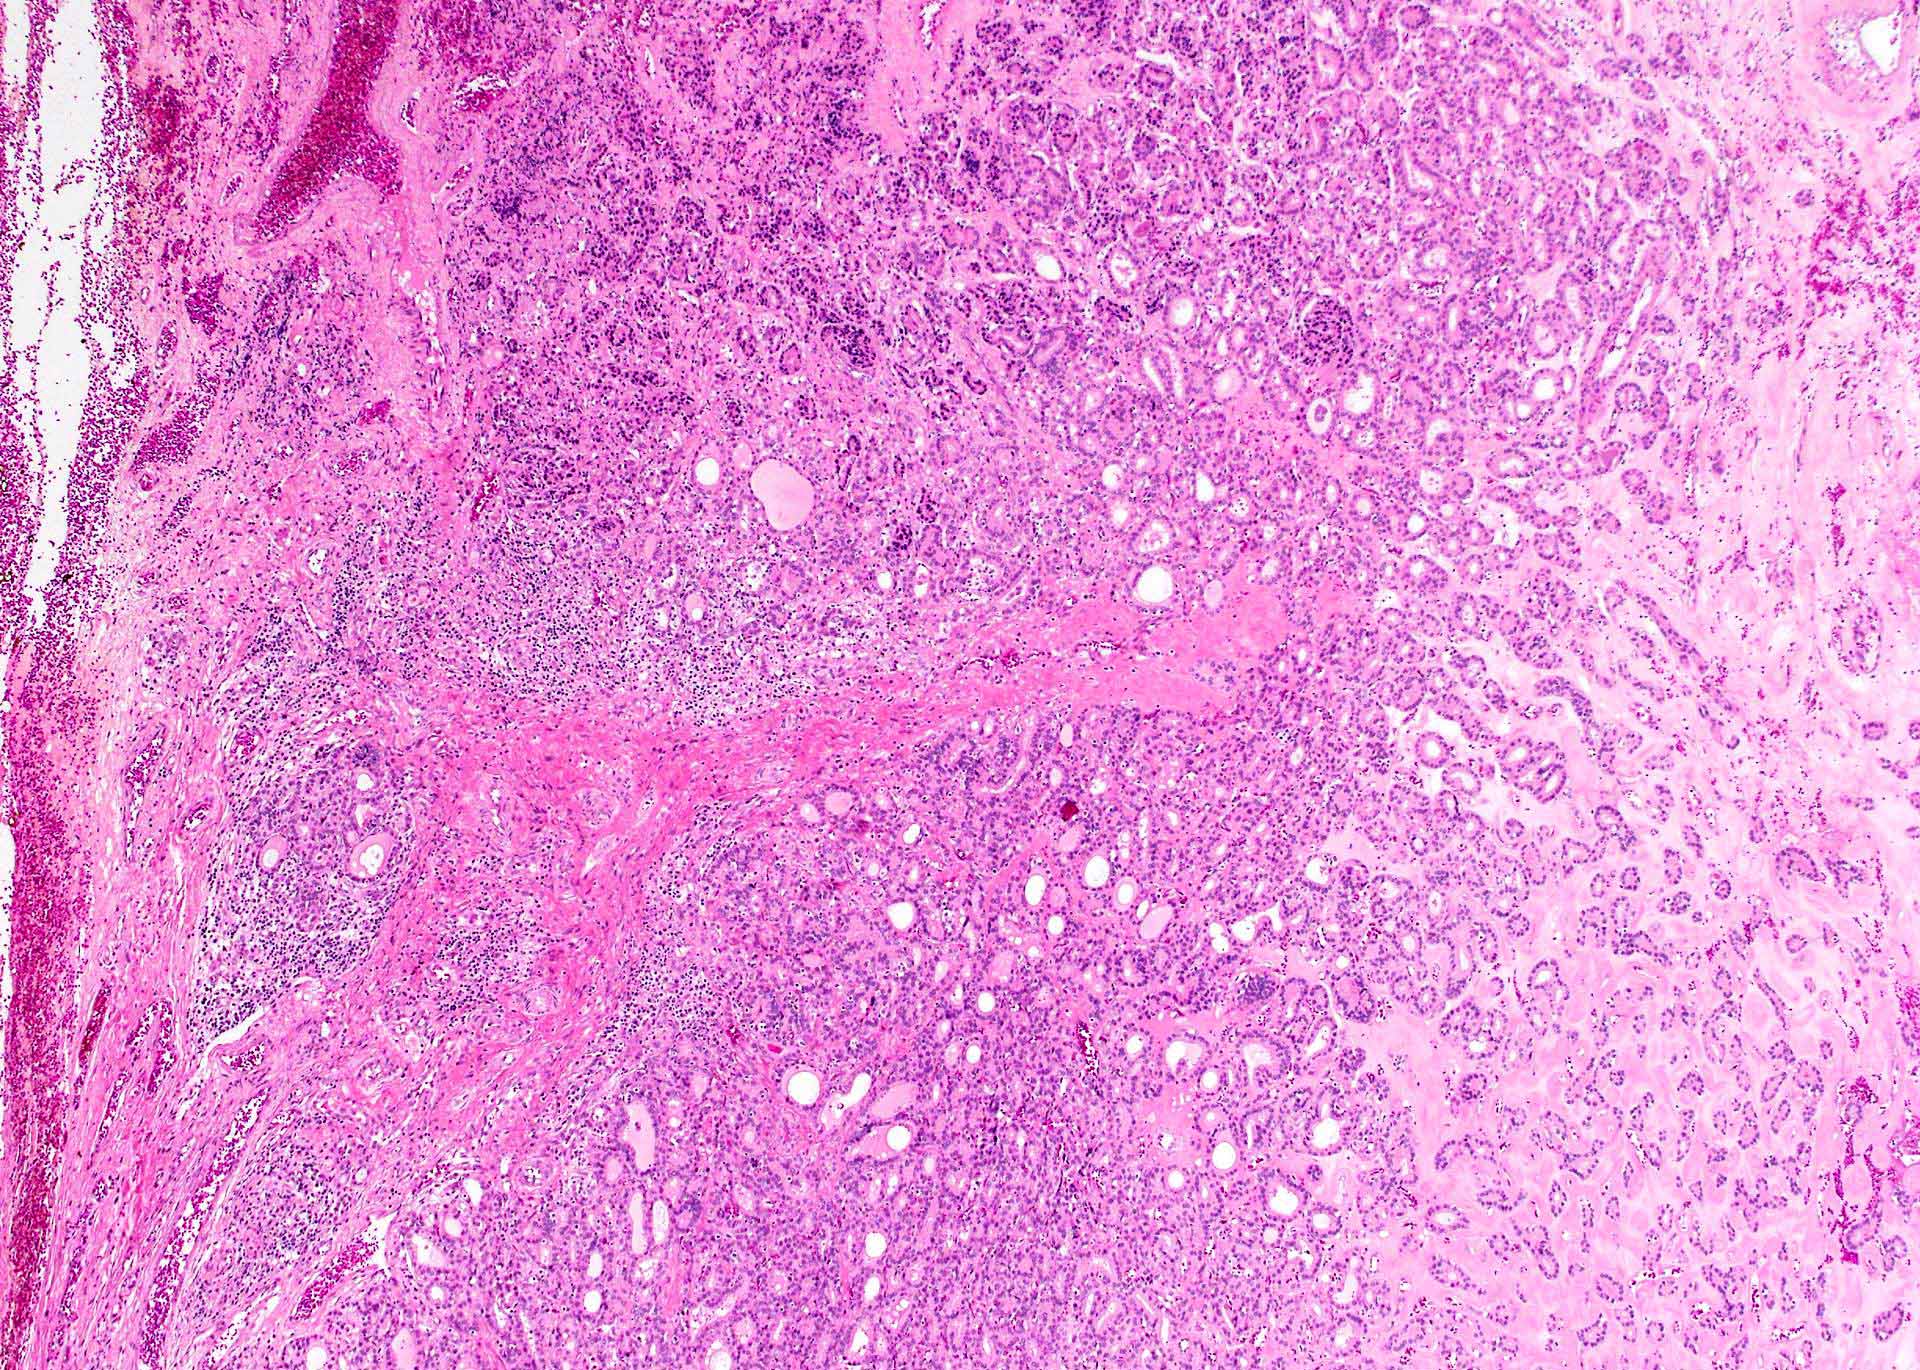 FNA induced alterations in thyroid nodule